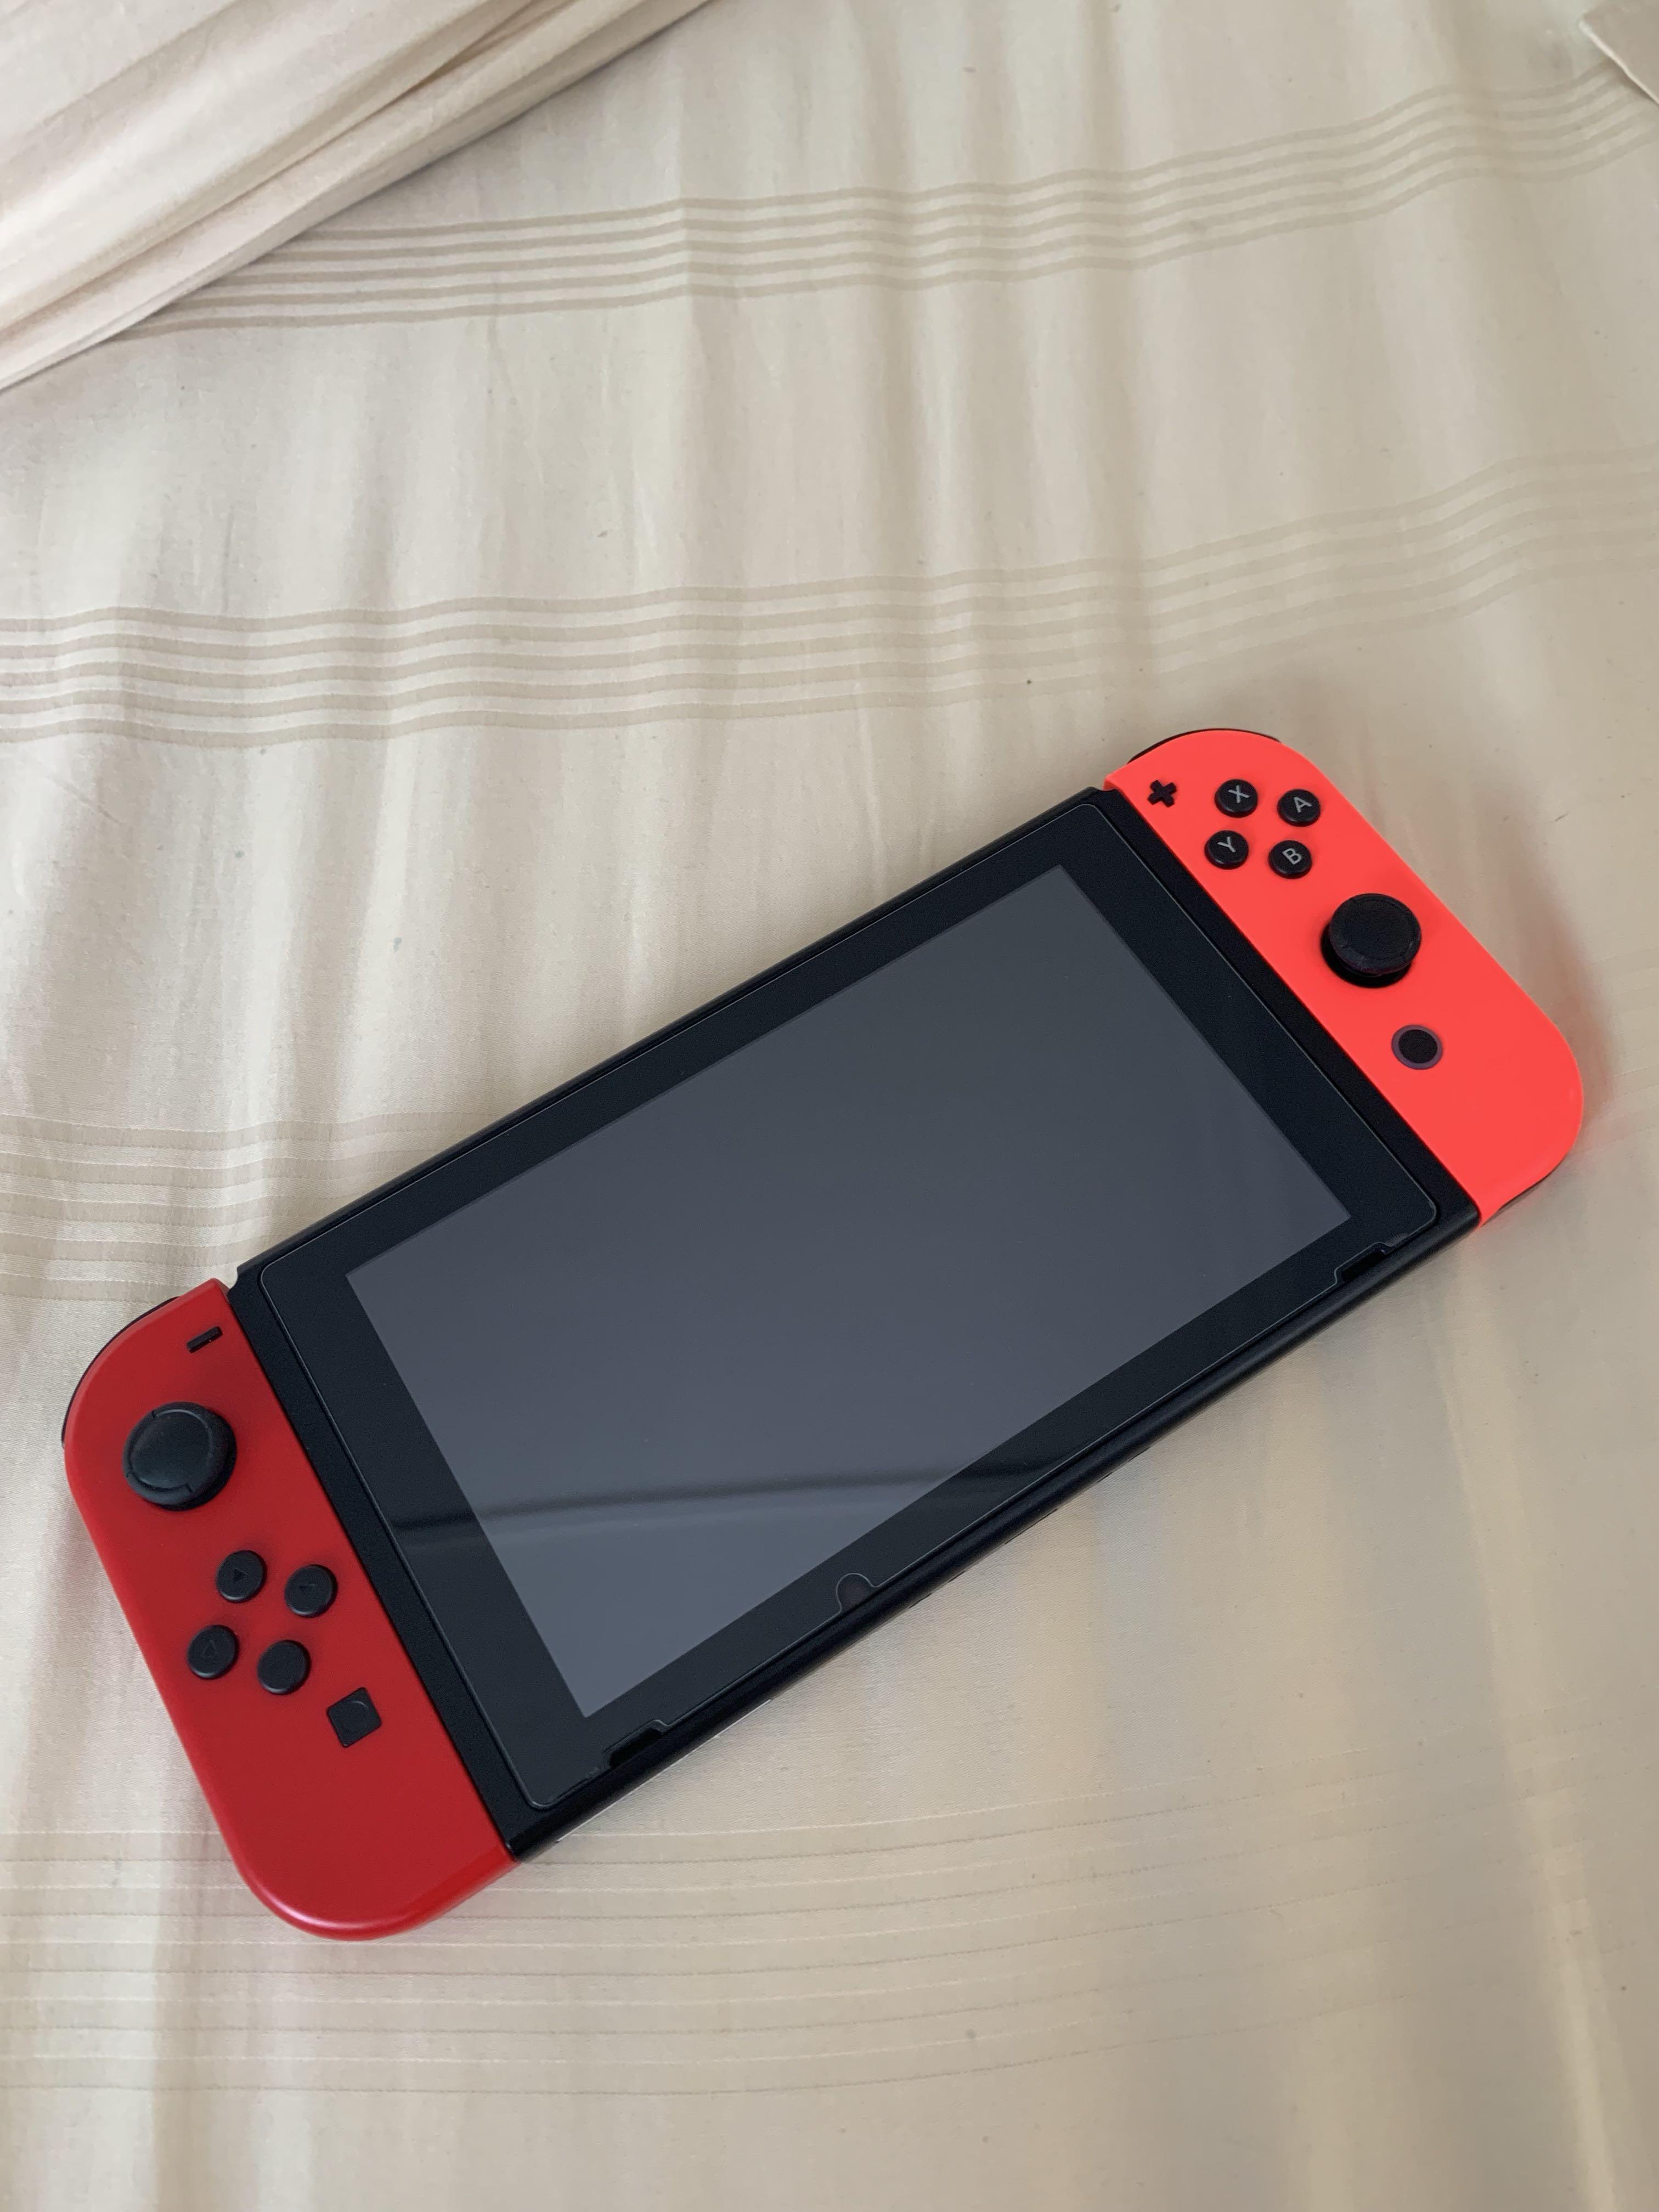 used nintendo switch for sale